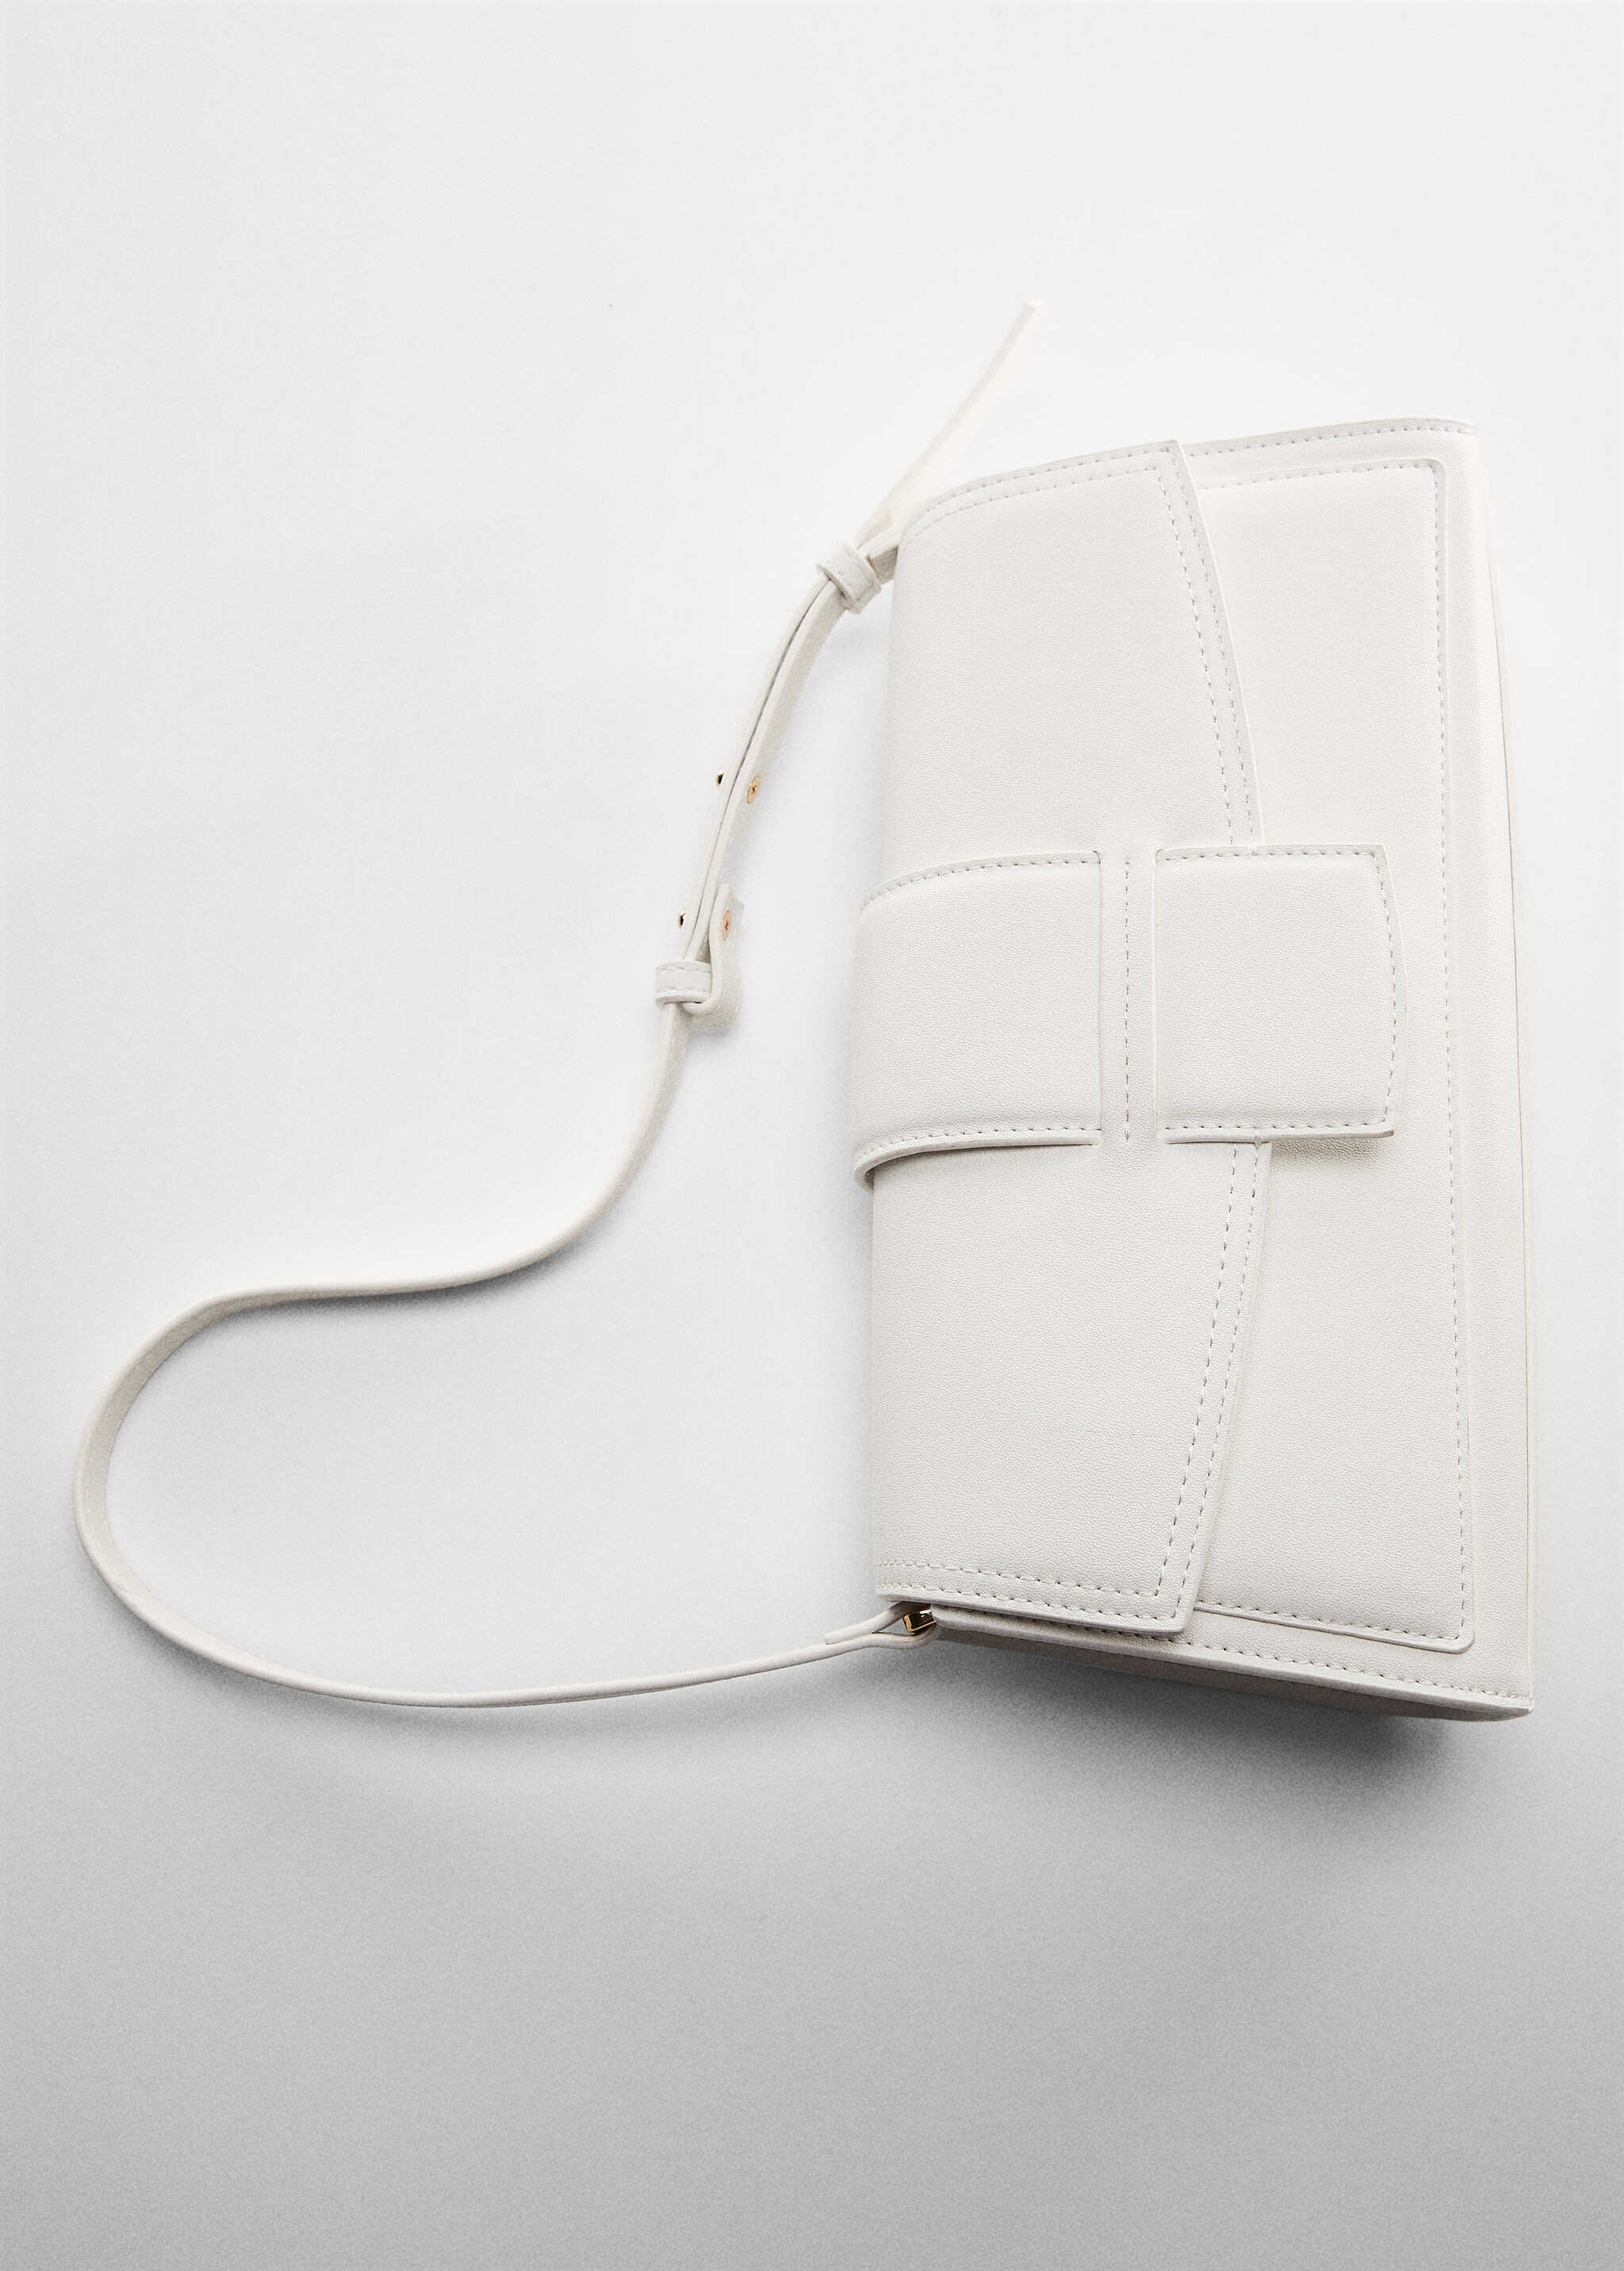 Rectangular bag with flap - Details of the article 5